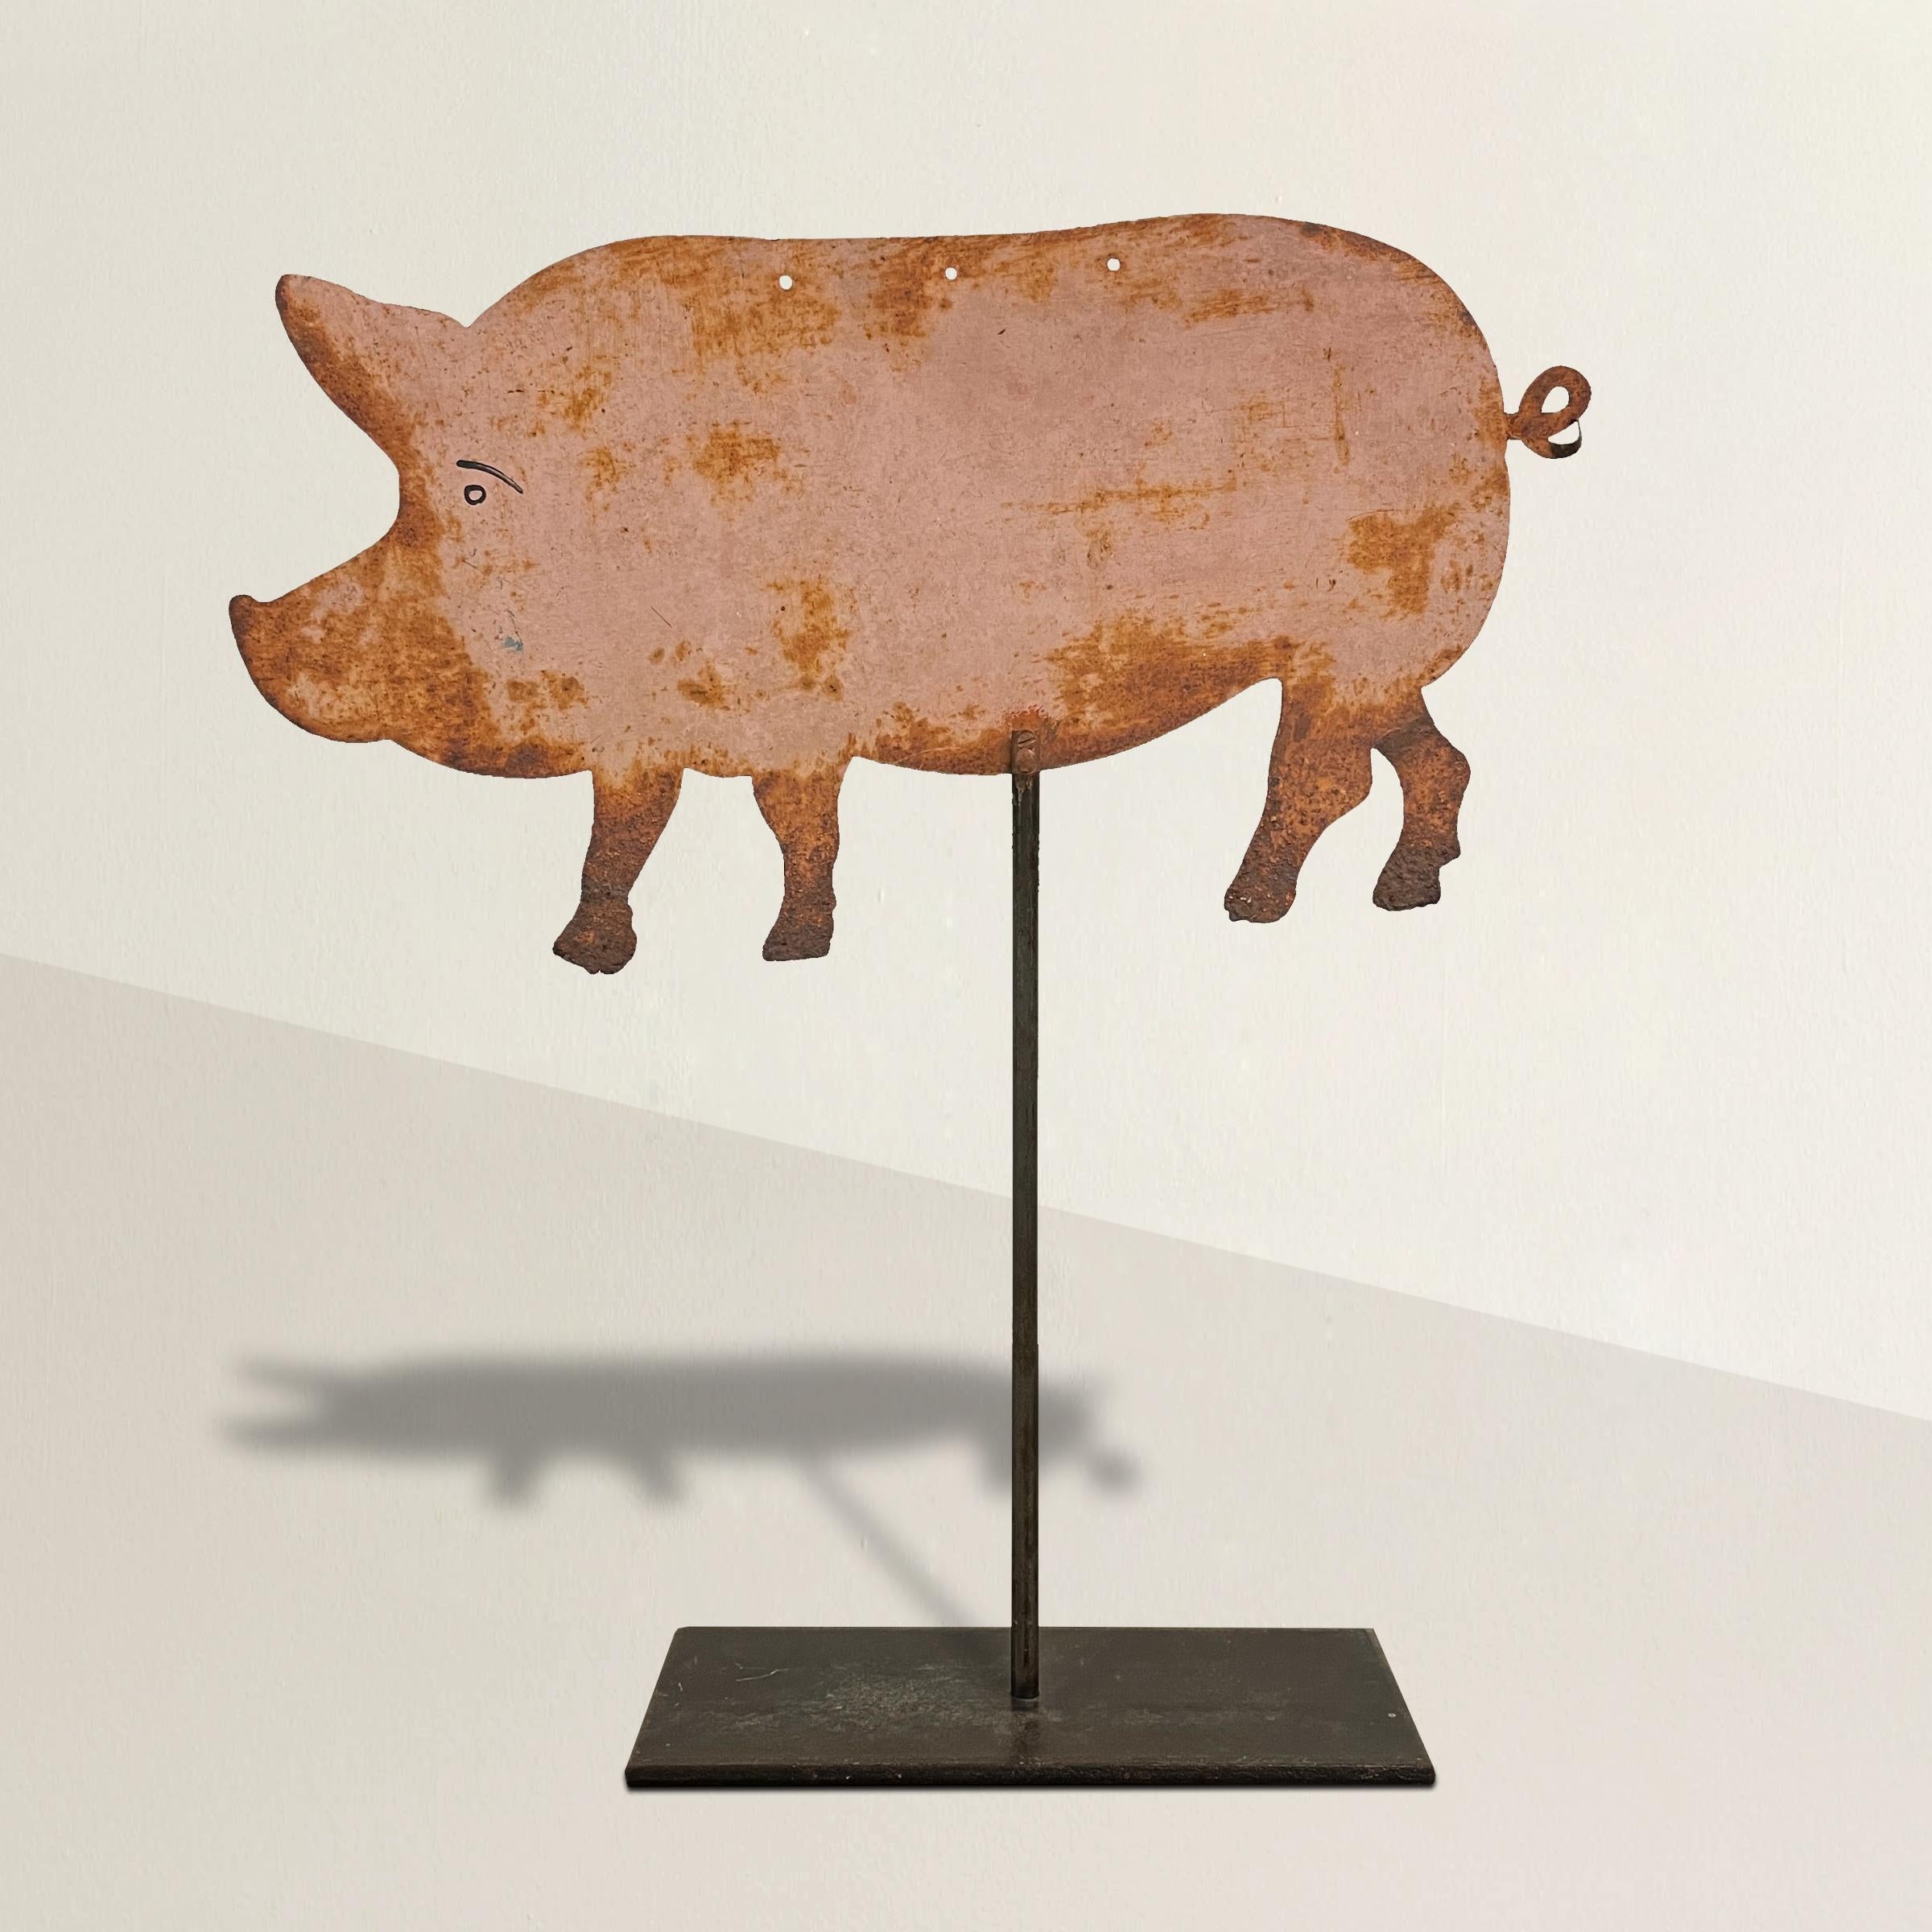 A playful early 20th century French painted steel butcher's shop sign in the shape of a pig, and mounted on a custom steel table-top mount. The sign originally hung from the three holes running along the back of the pig.